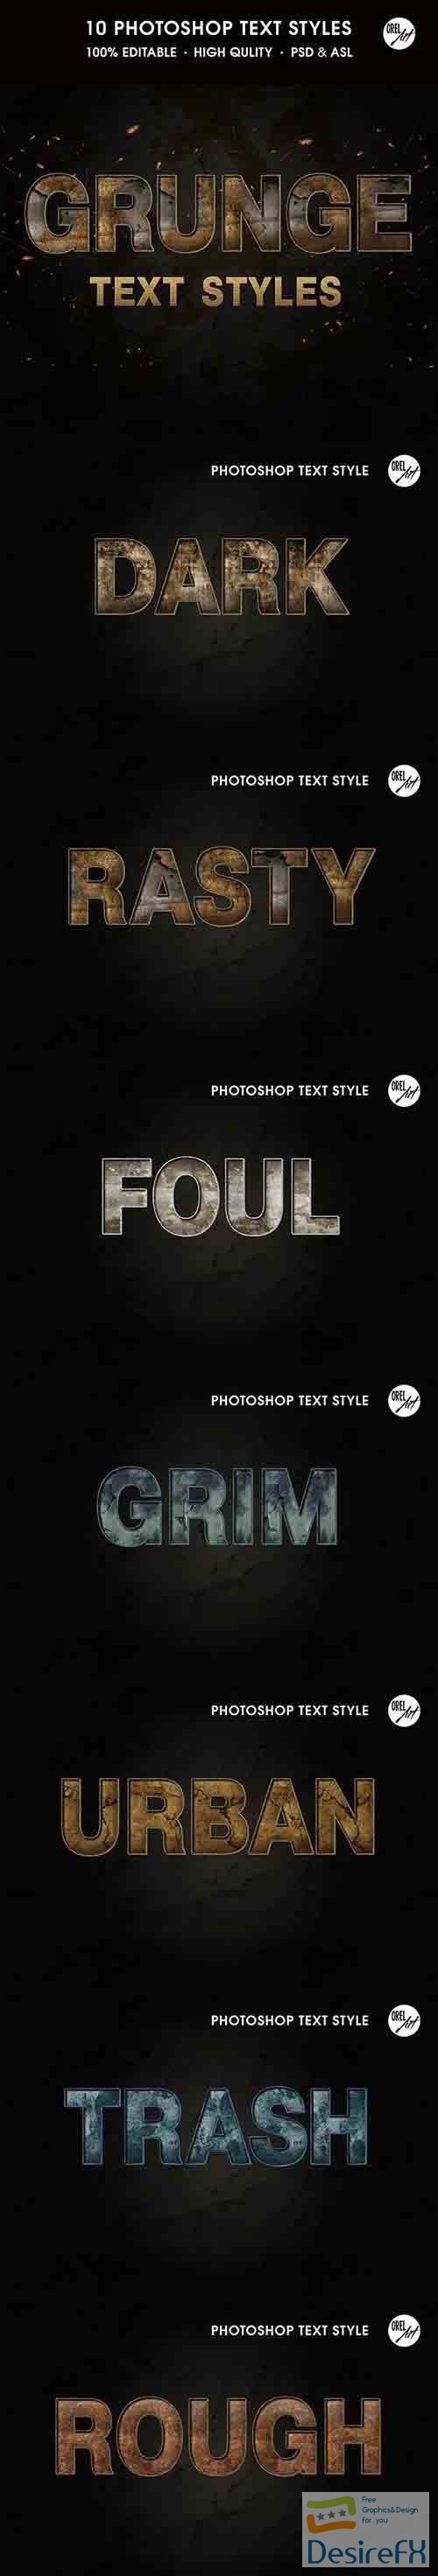 GraphicRiver - Grunge Text Styles 30386862